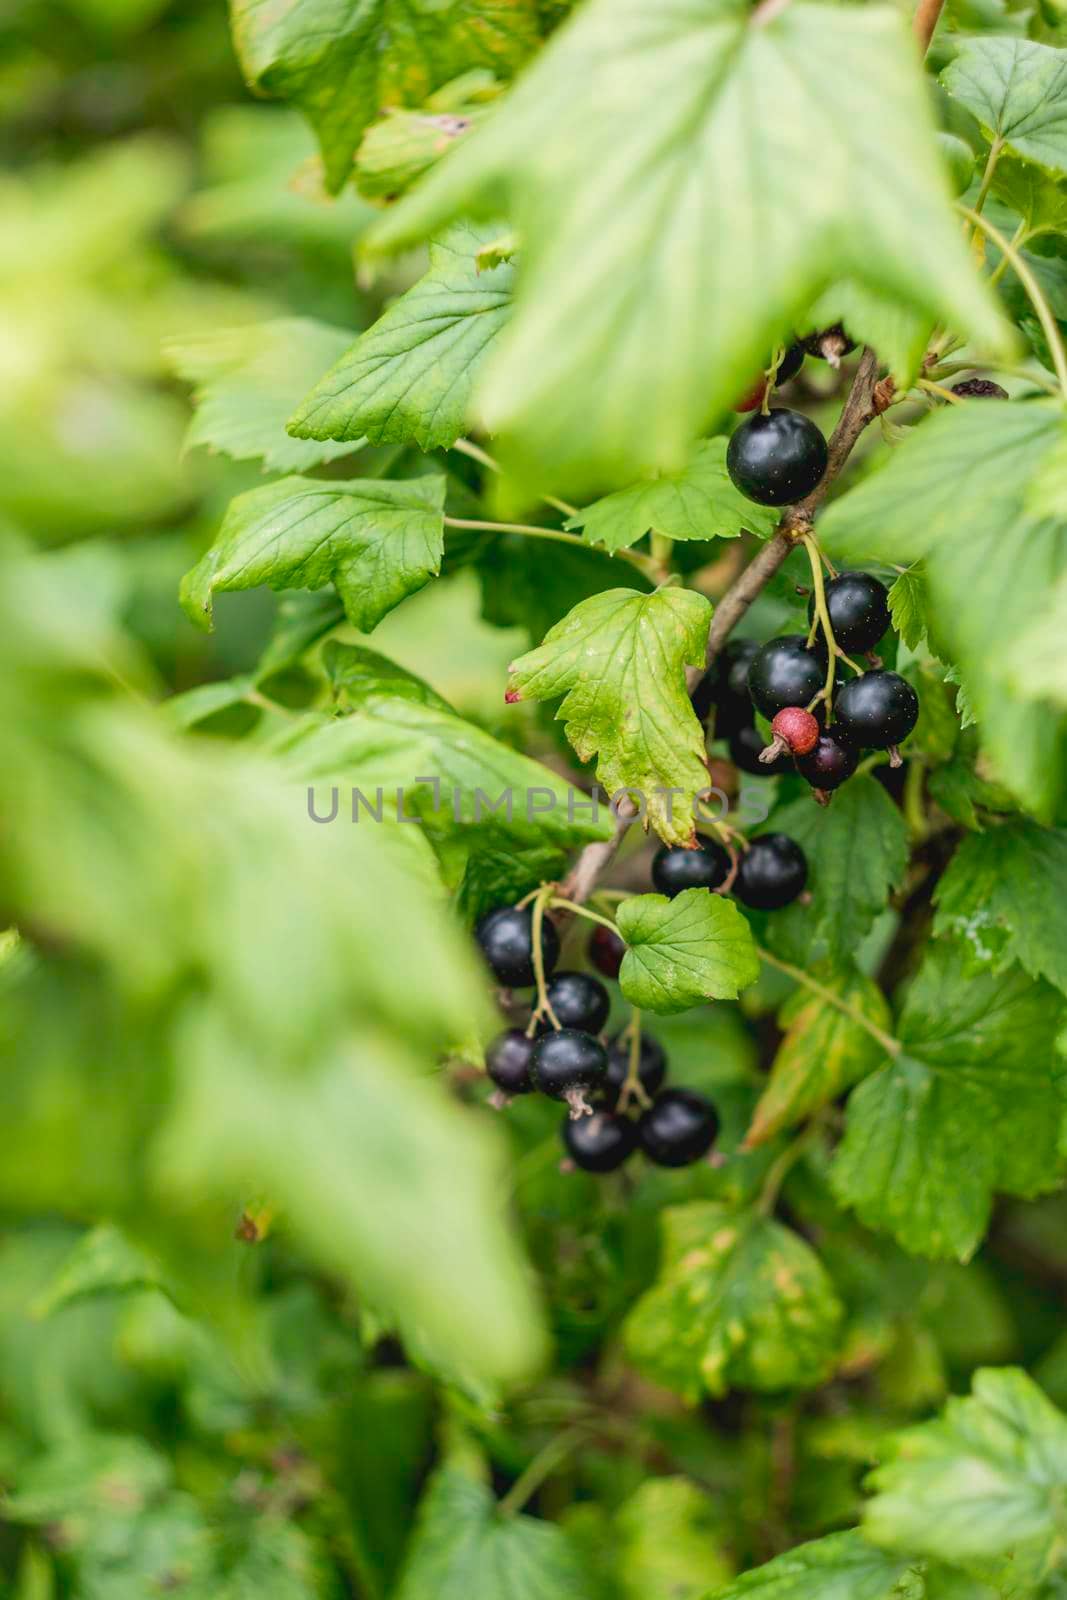 Bush of black currant in open ground. Green fresh leaves and black berries of edible plant. Gardening at spring and summer. Growing organic food.